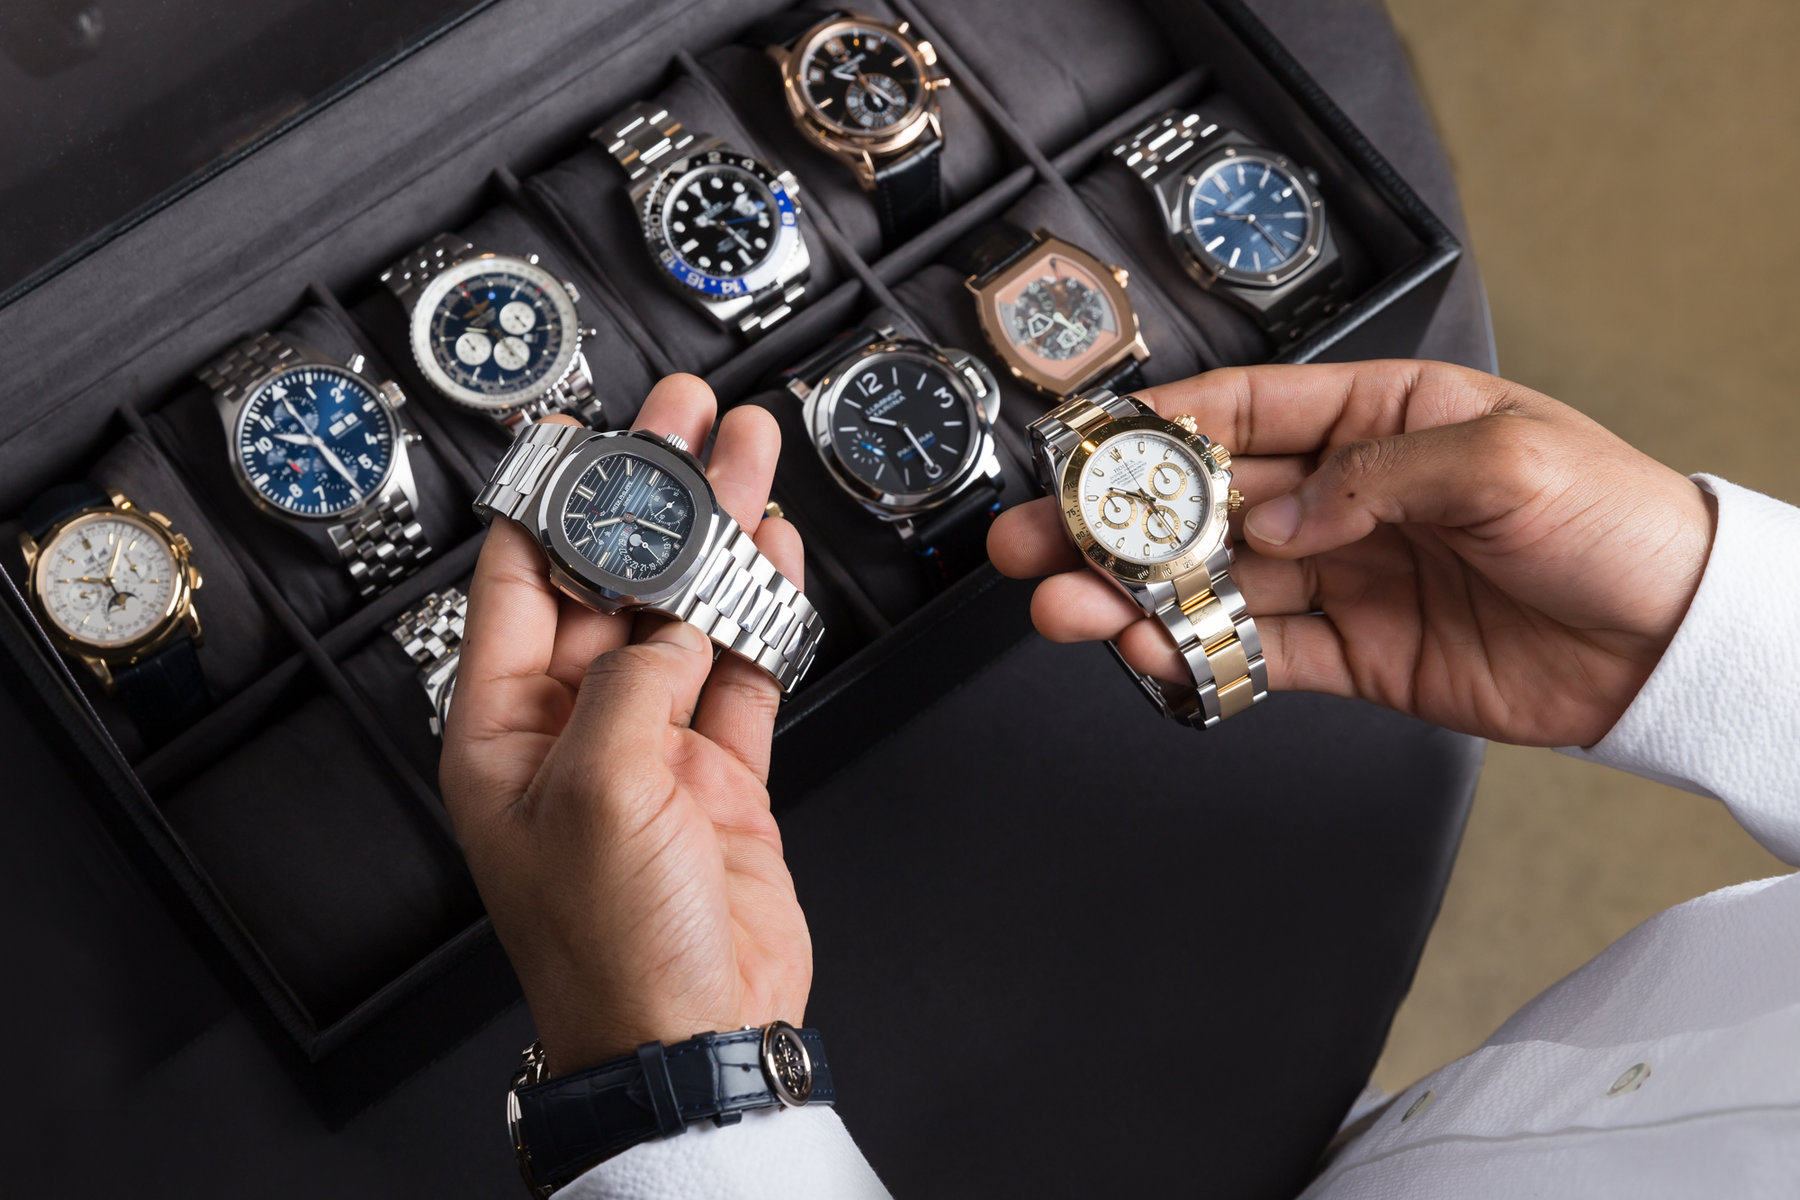 Pre-owned luxury watches Market'